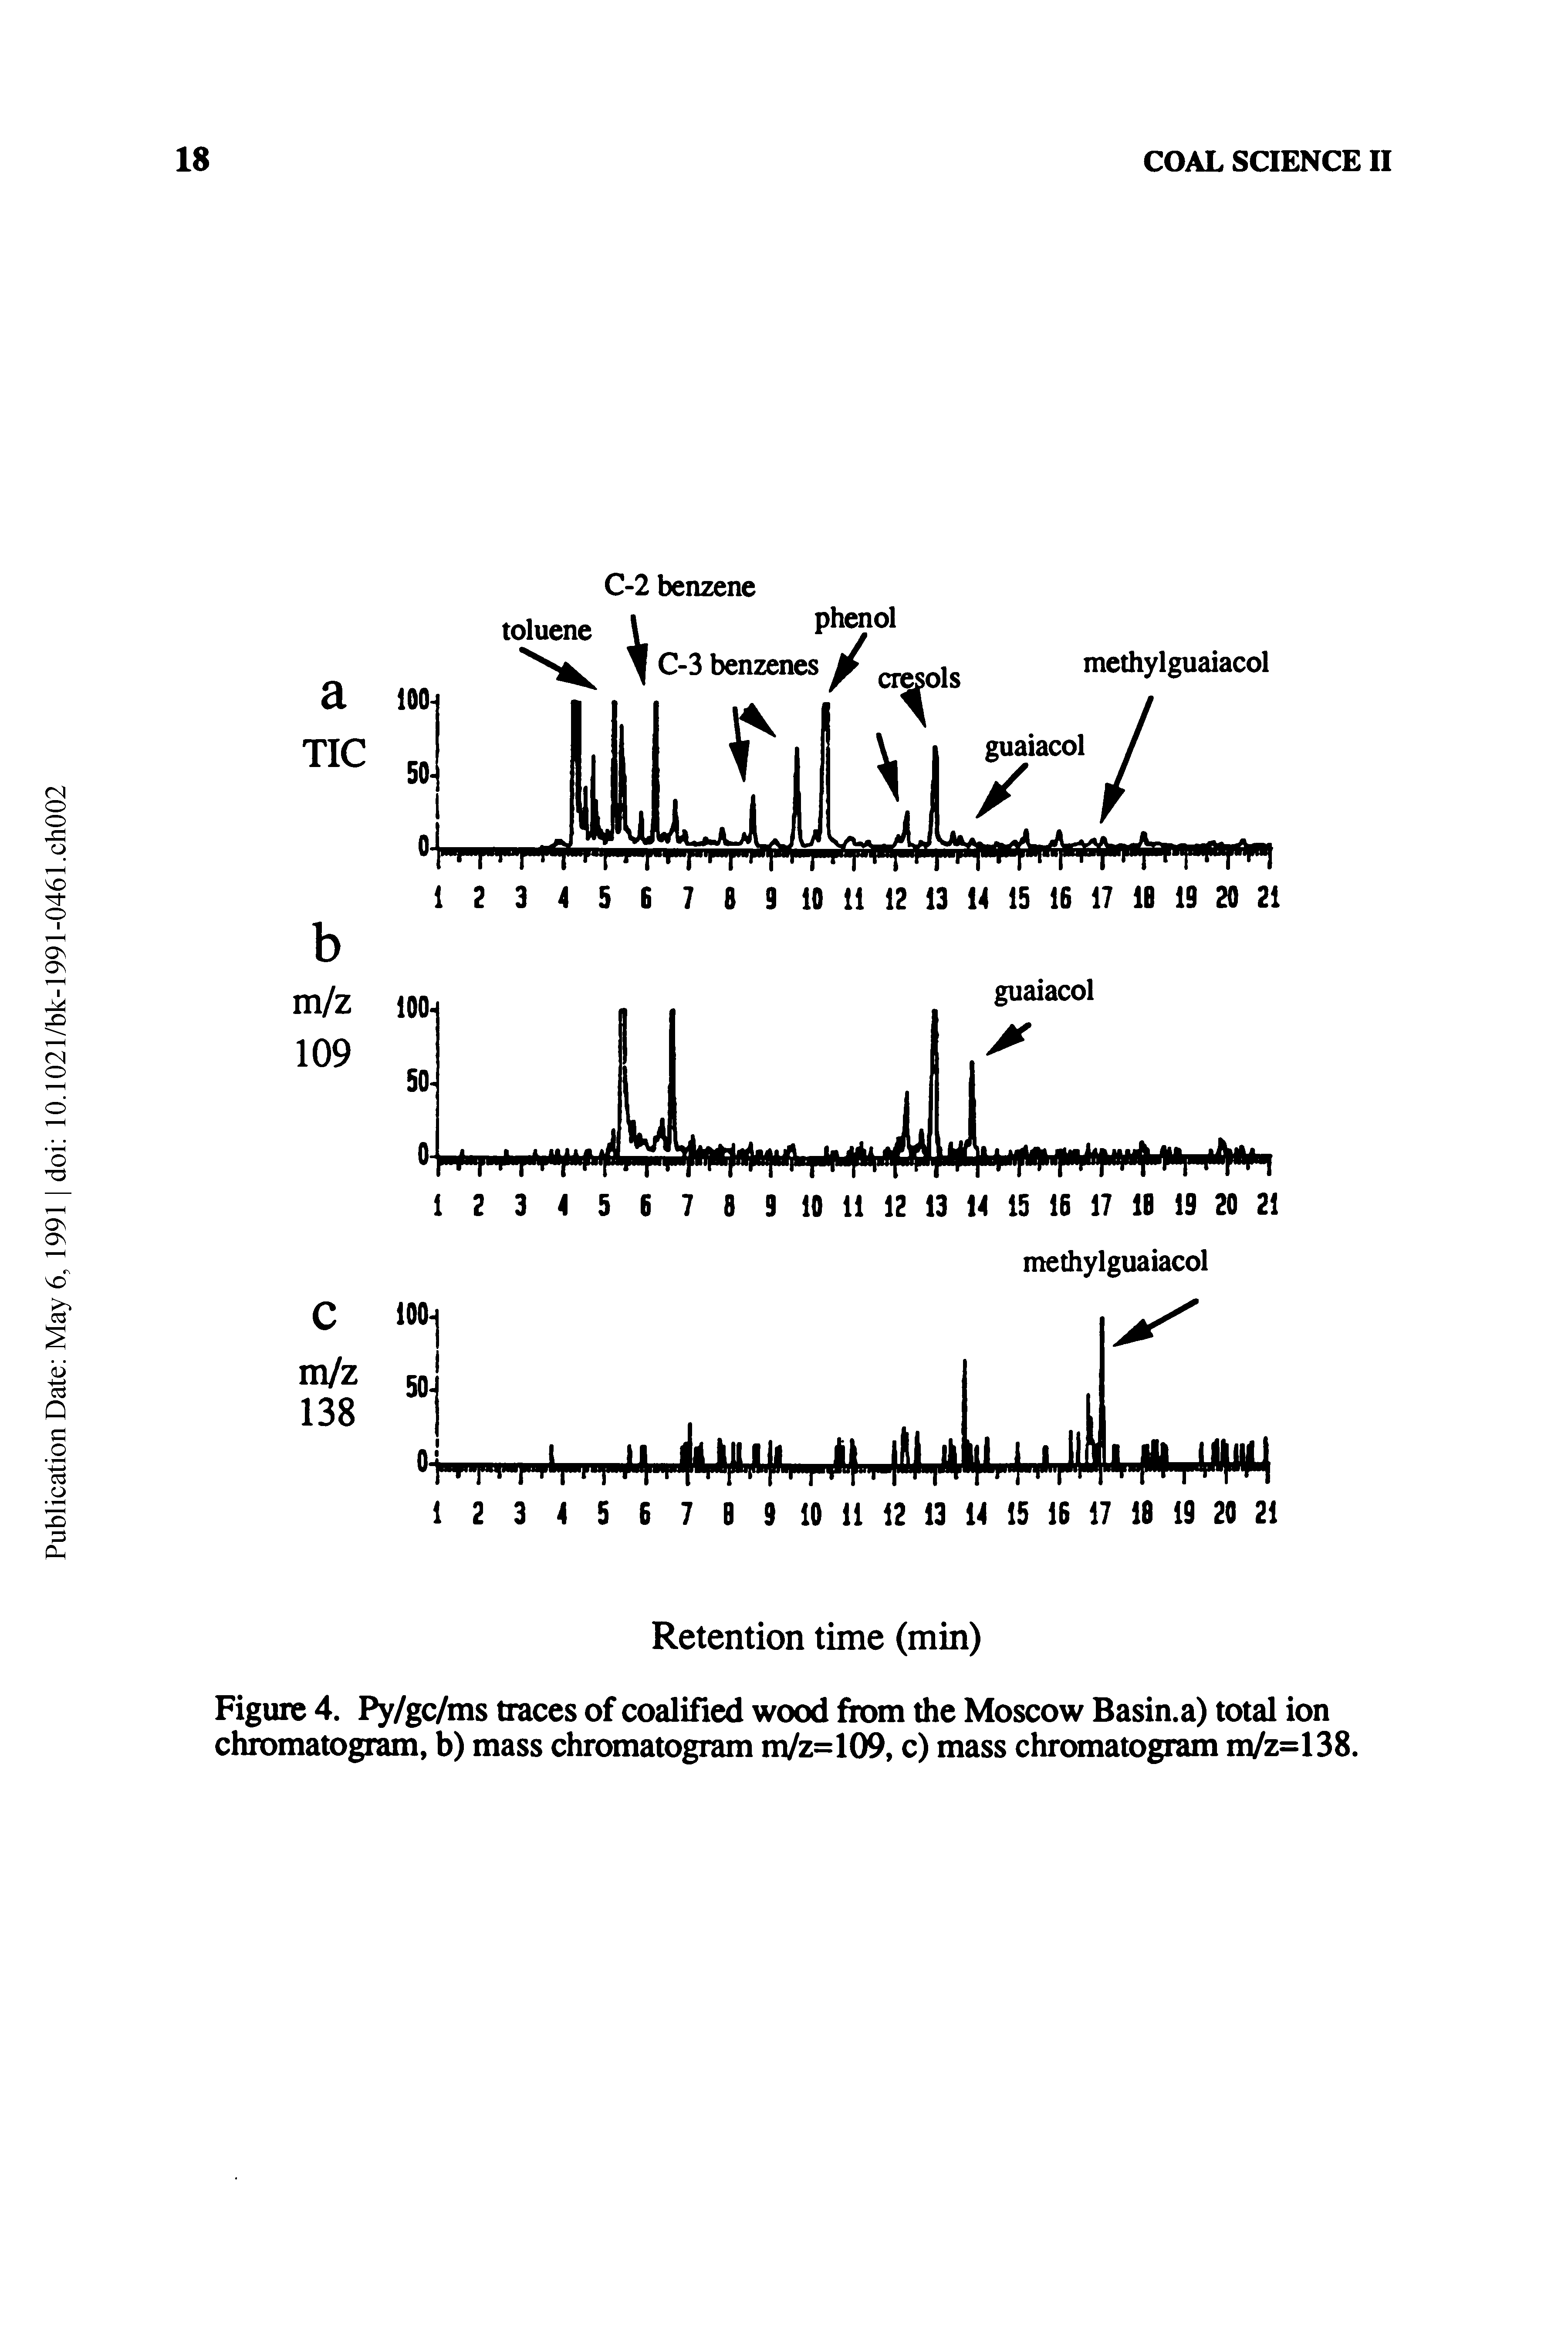 Figure 4. Py/gc/ms traces of coalified wood from the Moscow Basin.a) total ion chromatogram, b) mass chromatogram m/z=109, c) mass chromatogram m/z=138.